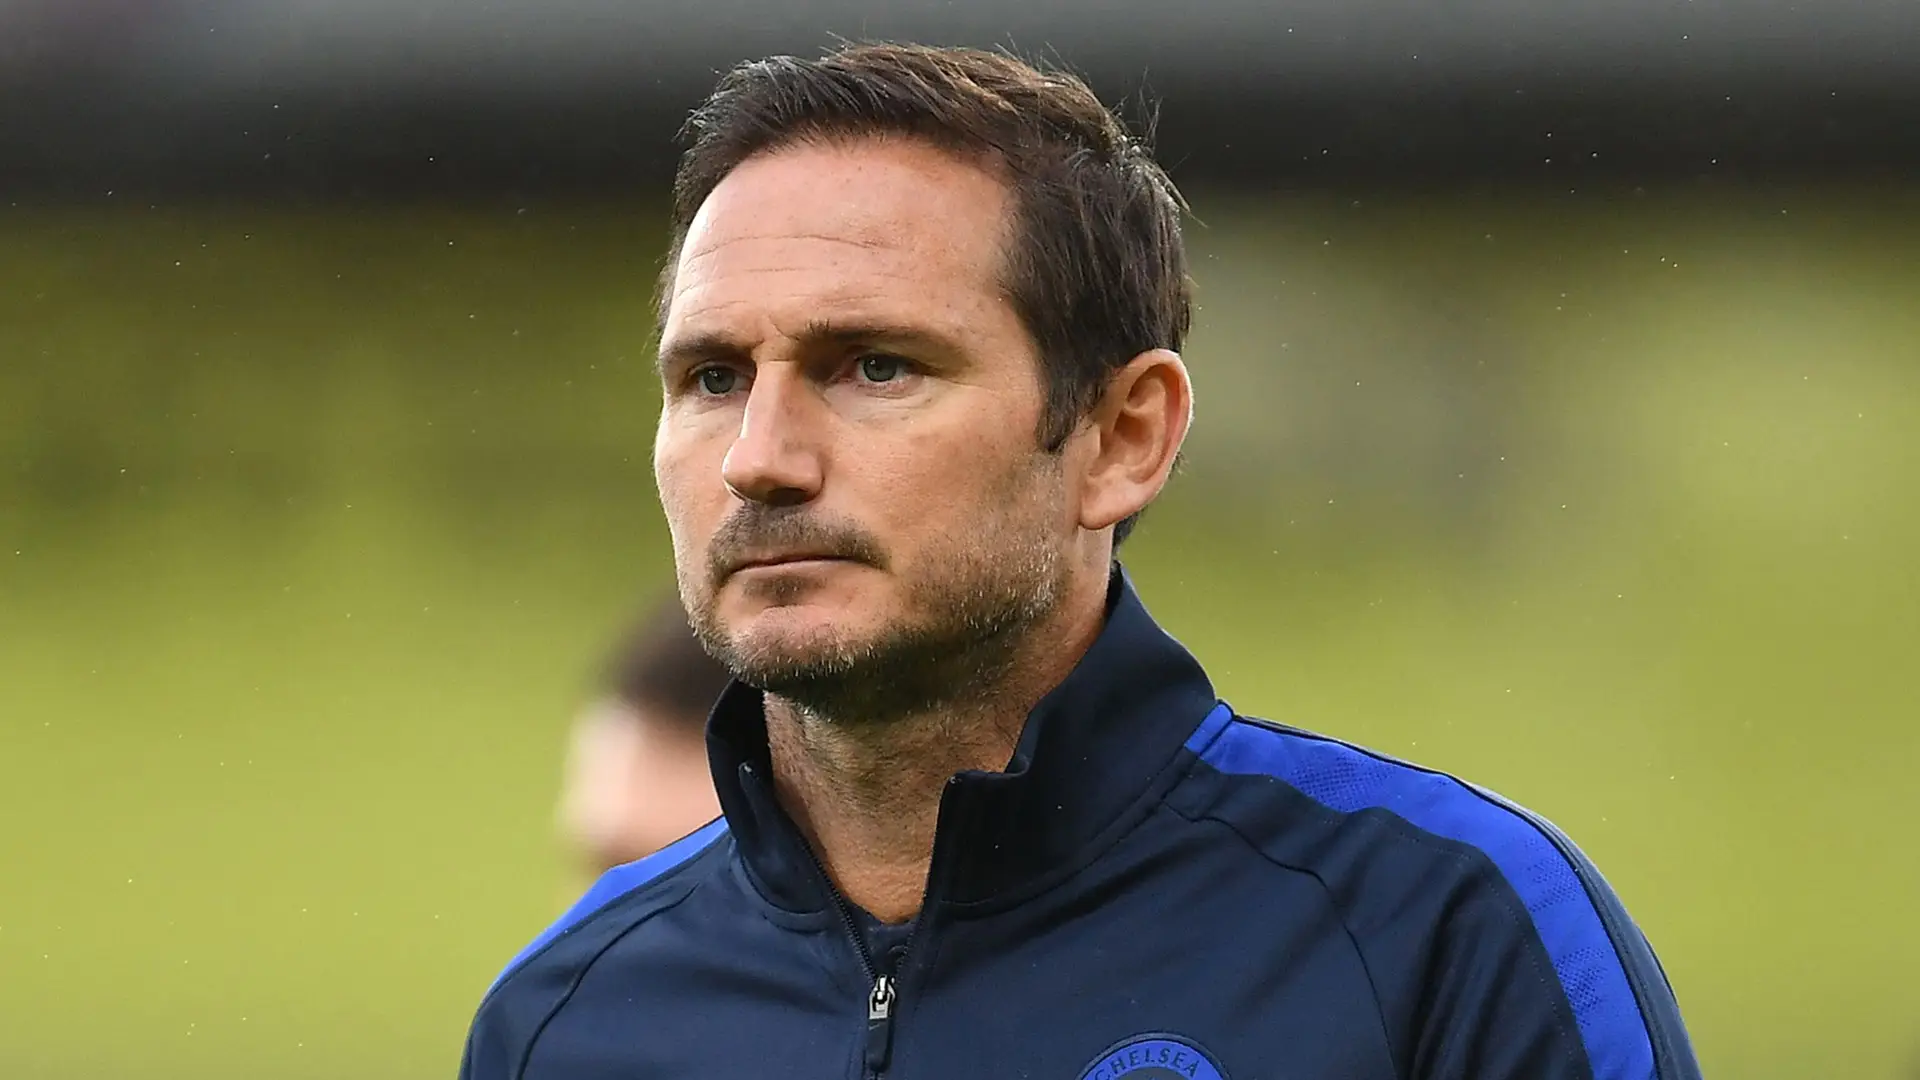 Lampard reveals his 2 main learnings from time in football